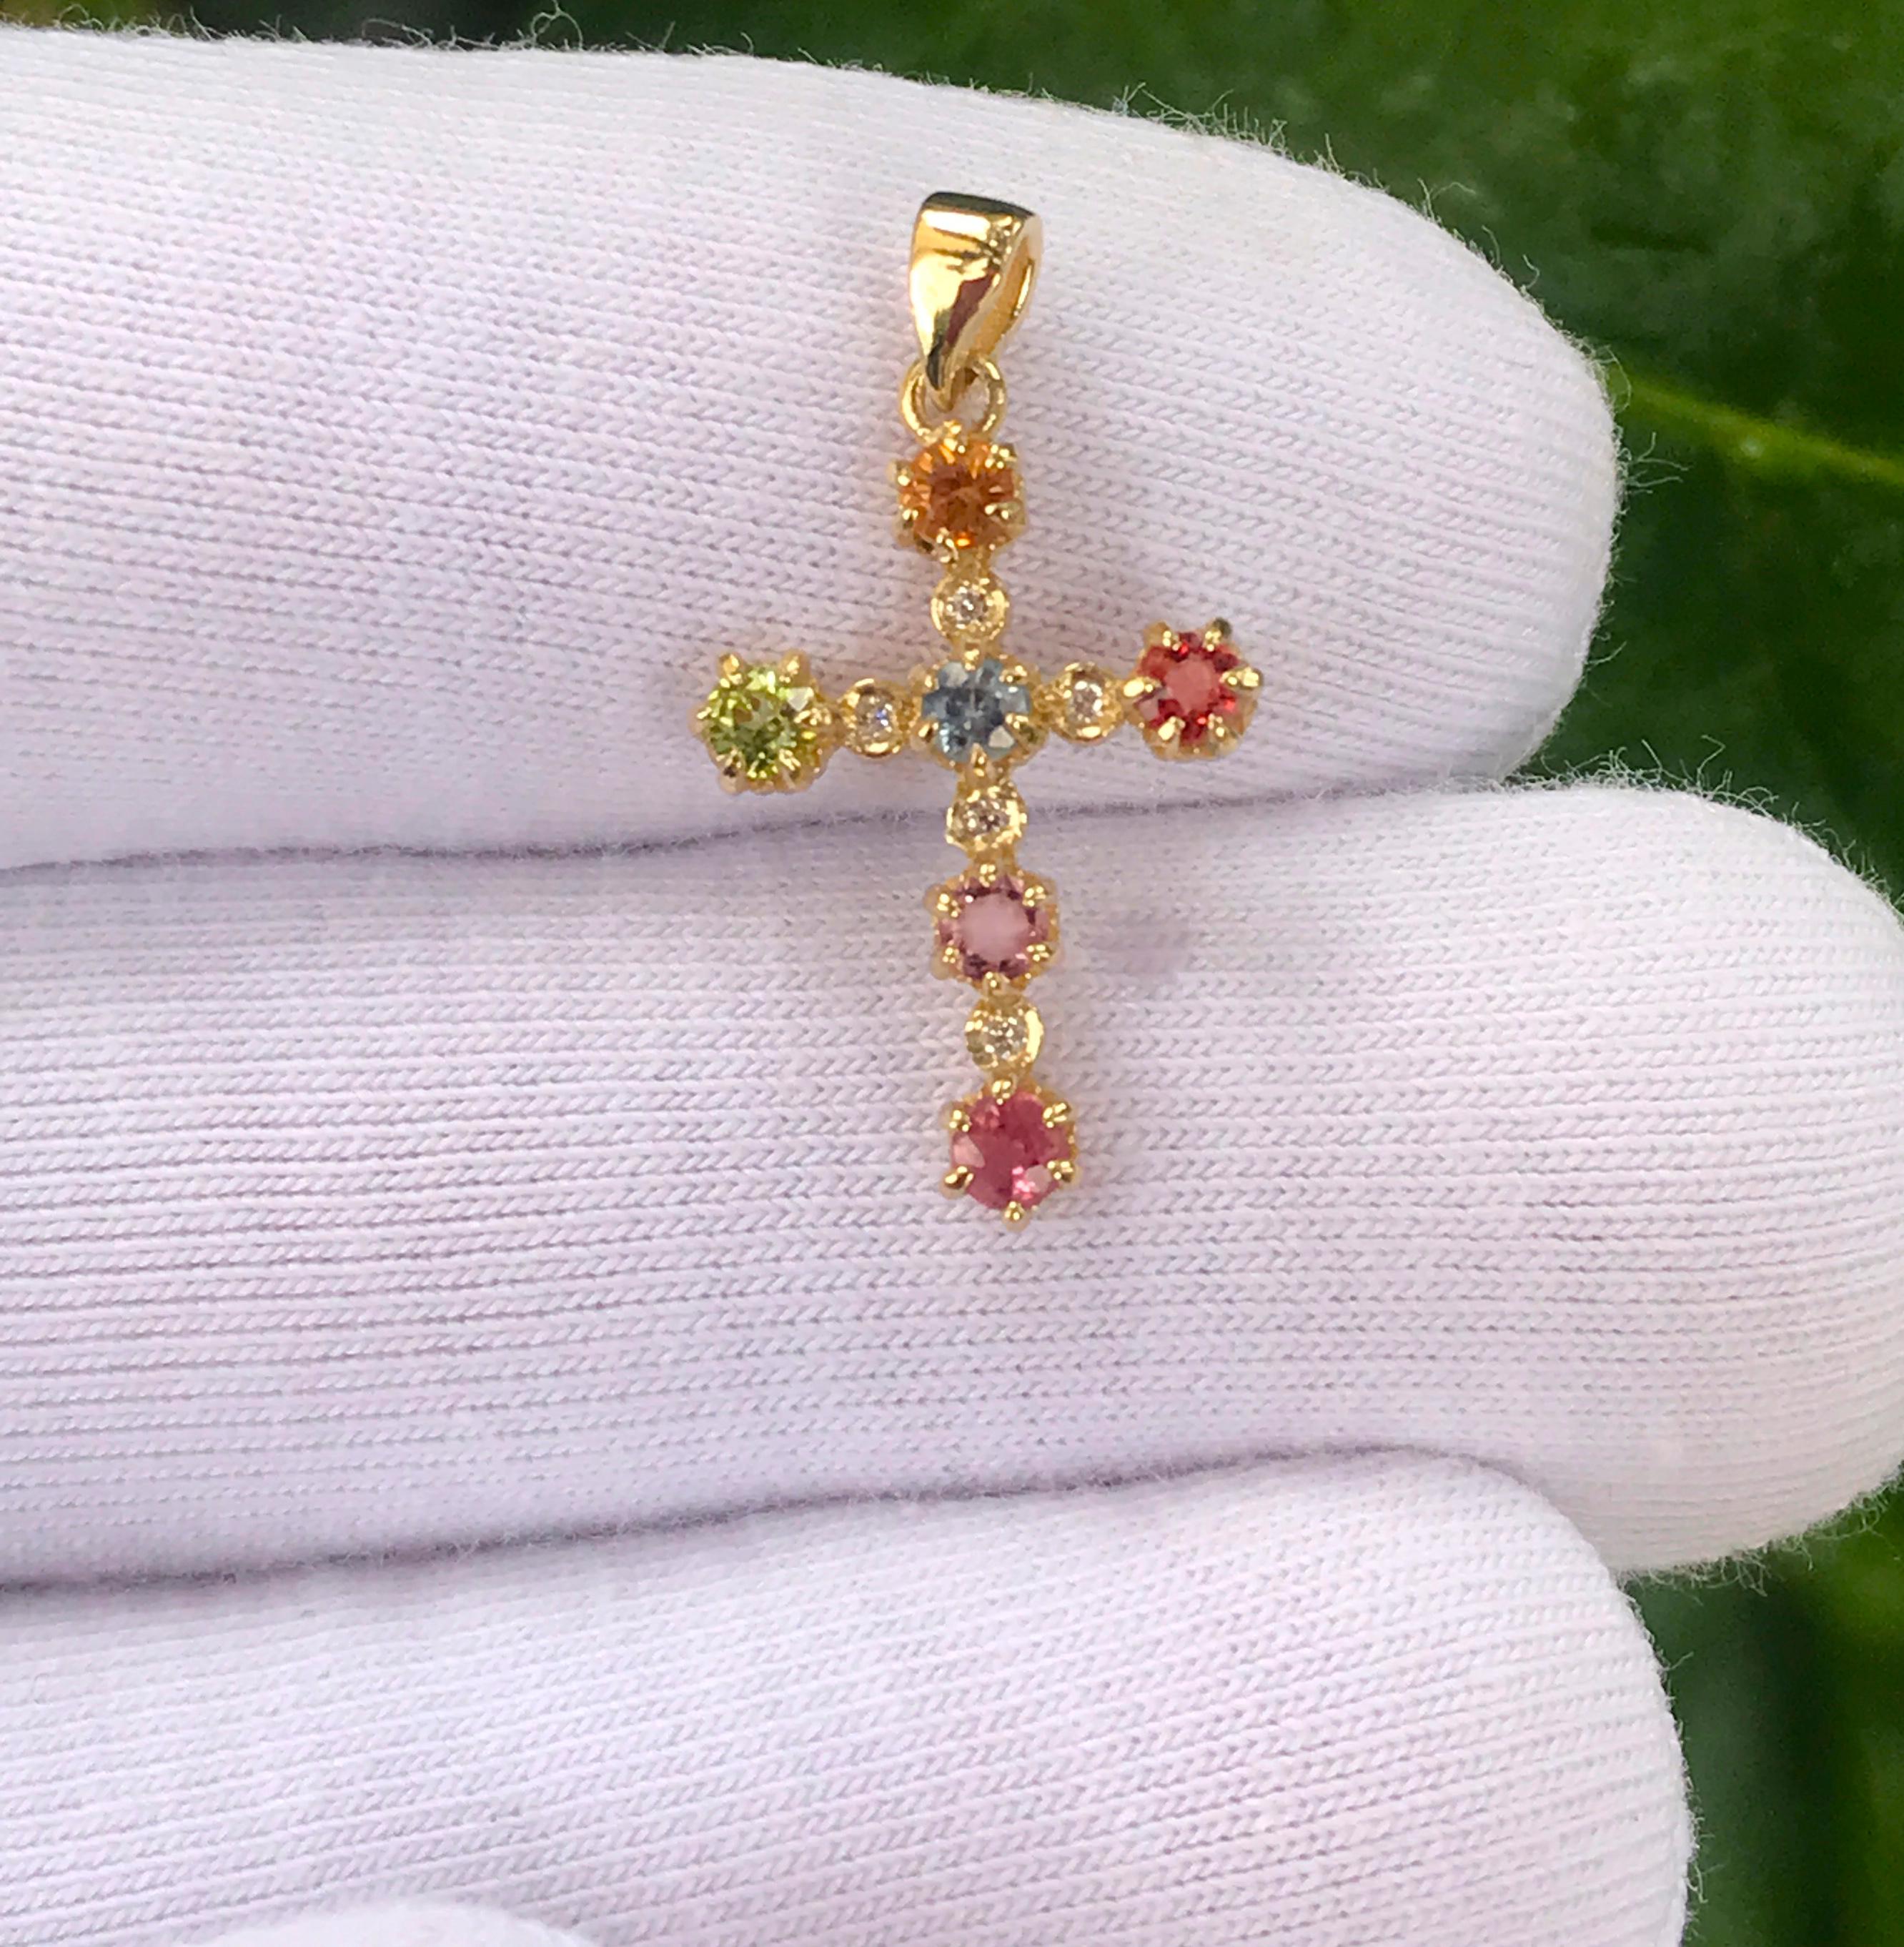  Cross pendant with fancy color sapphires and diamonds
Weight: 1.2 g.
Gold - 14k yellow gold 
Size -  22x12.5mm
Stones:
1. Fancy color sapphires 6 pieces - round cut, green, pink, red, light blue, yellow and purple color, transparent, 0.10x6 =0.60